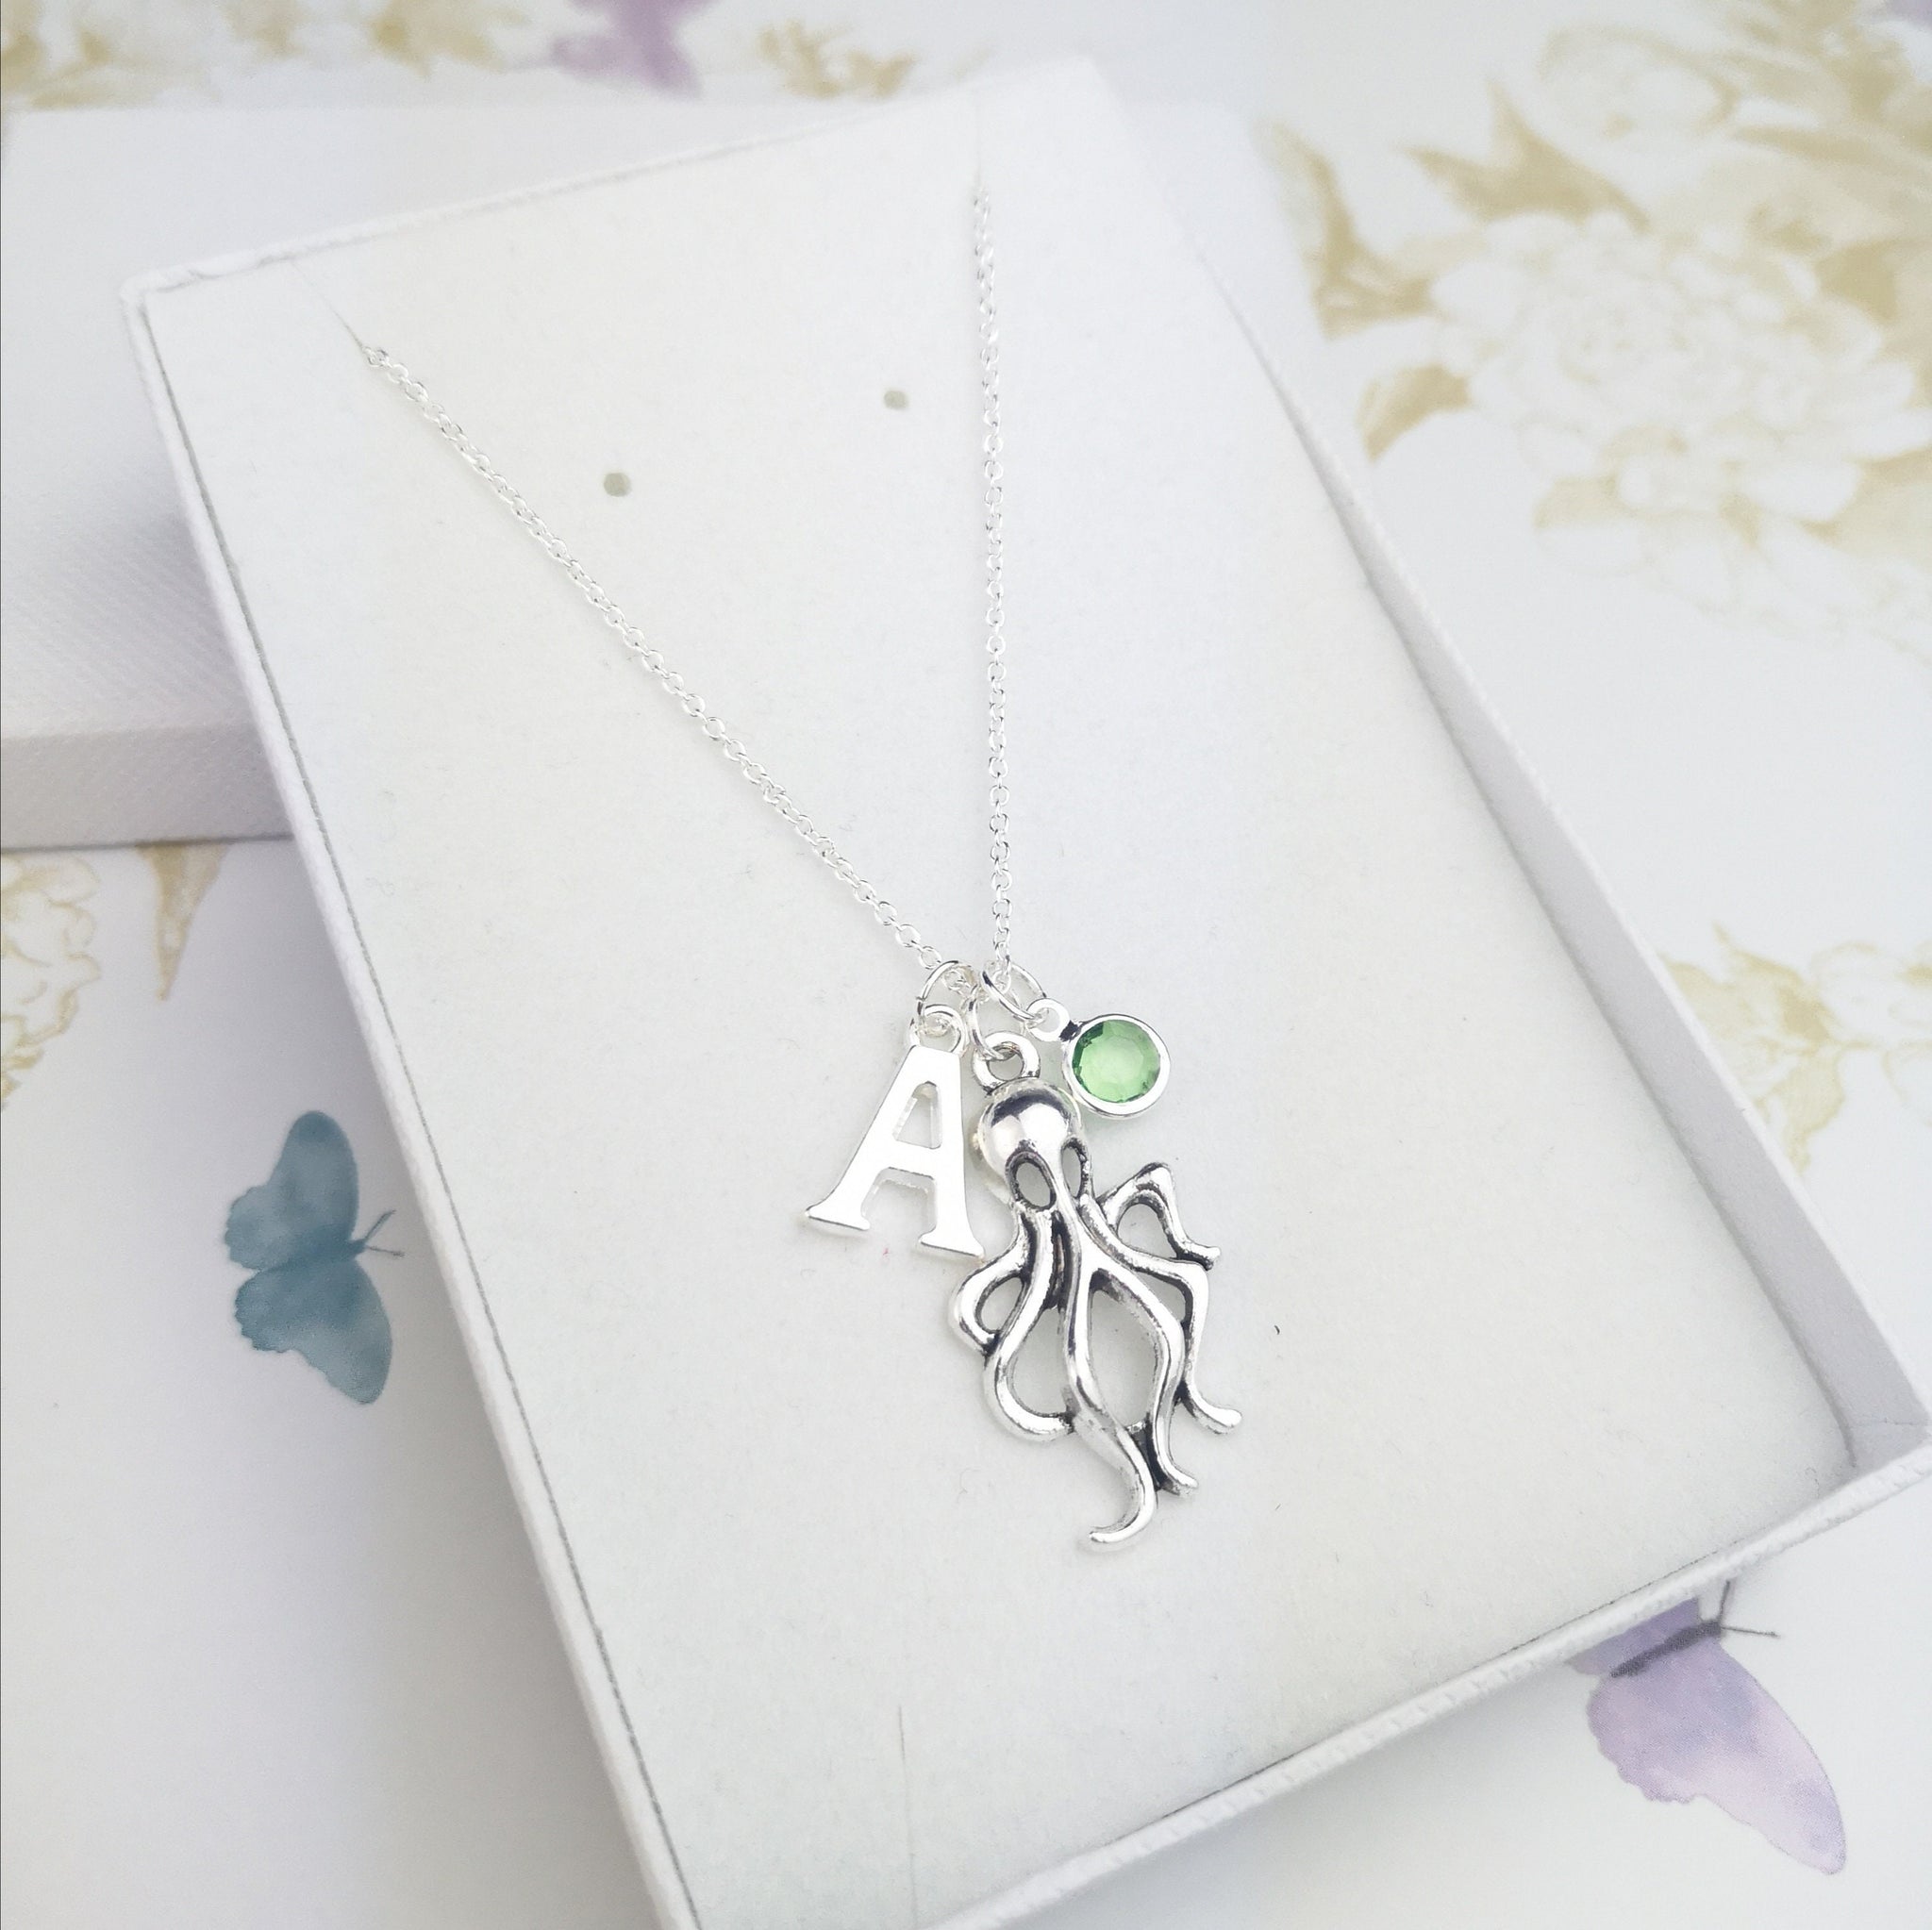 octopus necklace with initial and birthstone